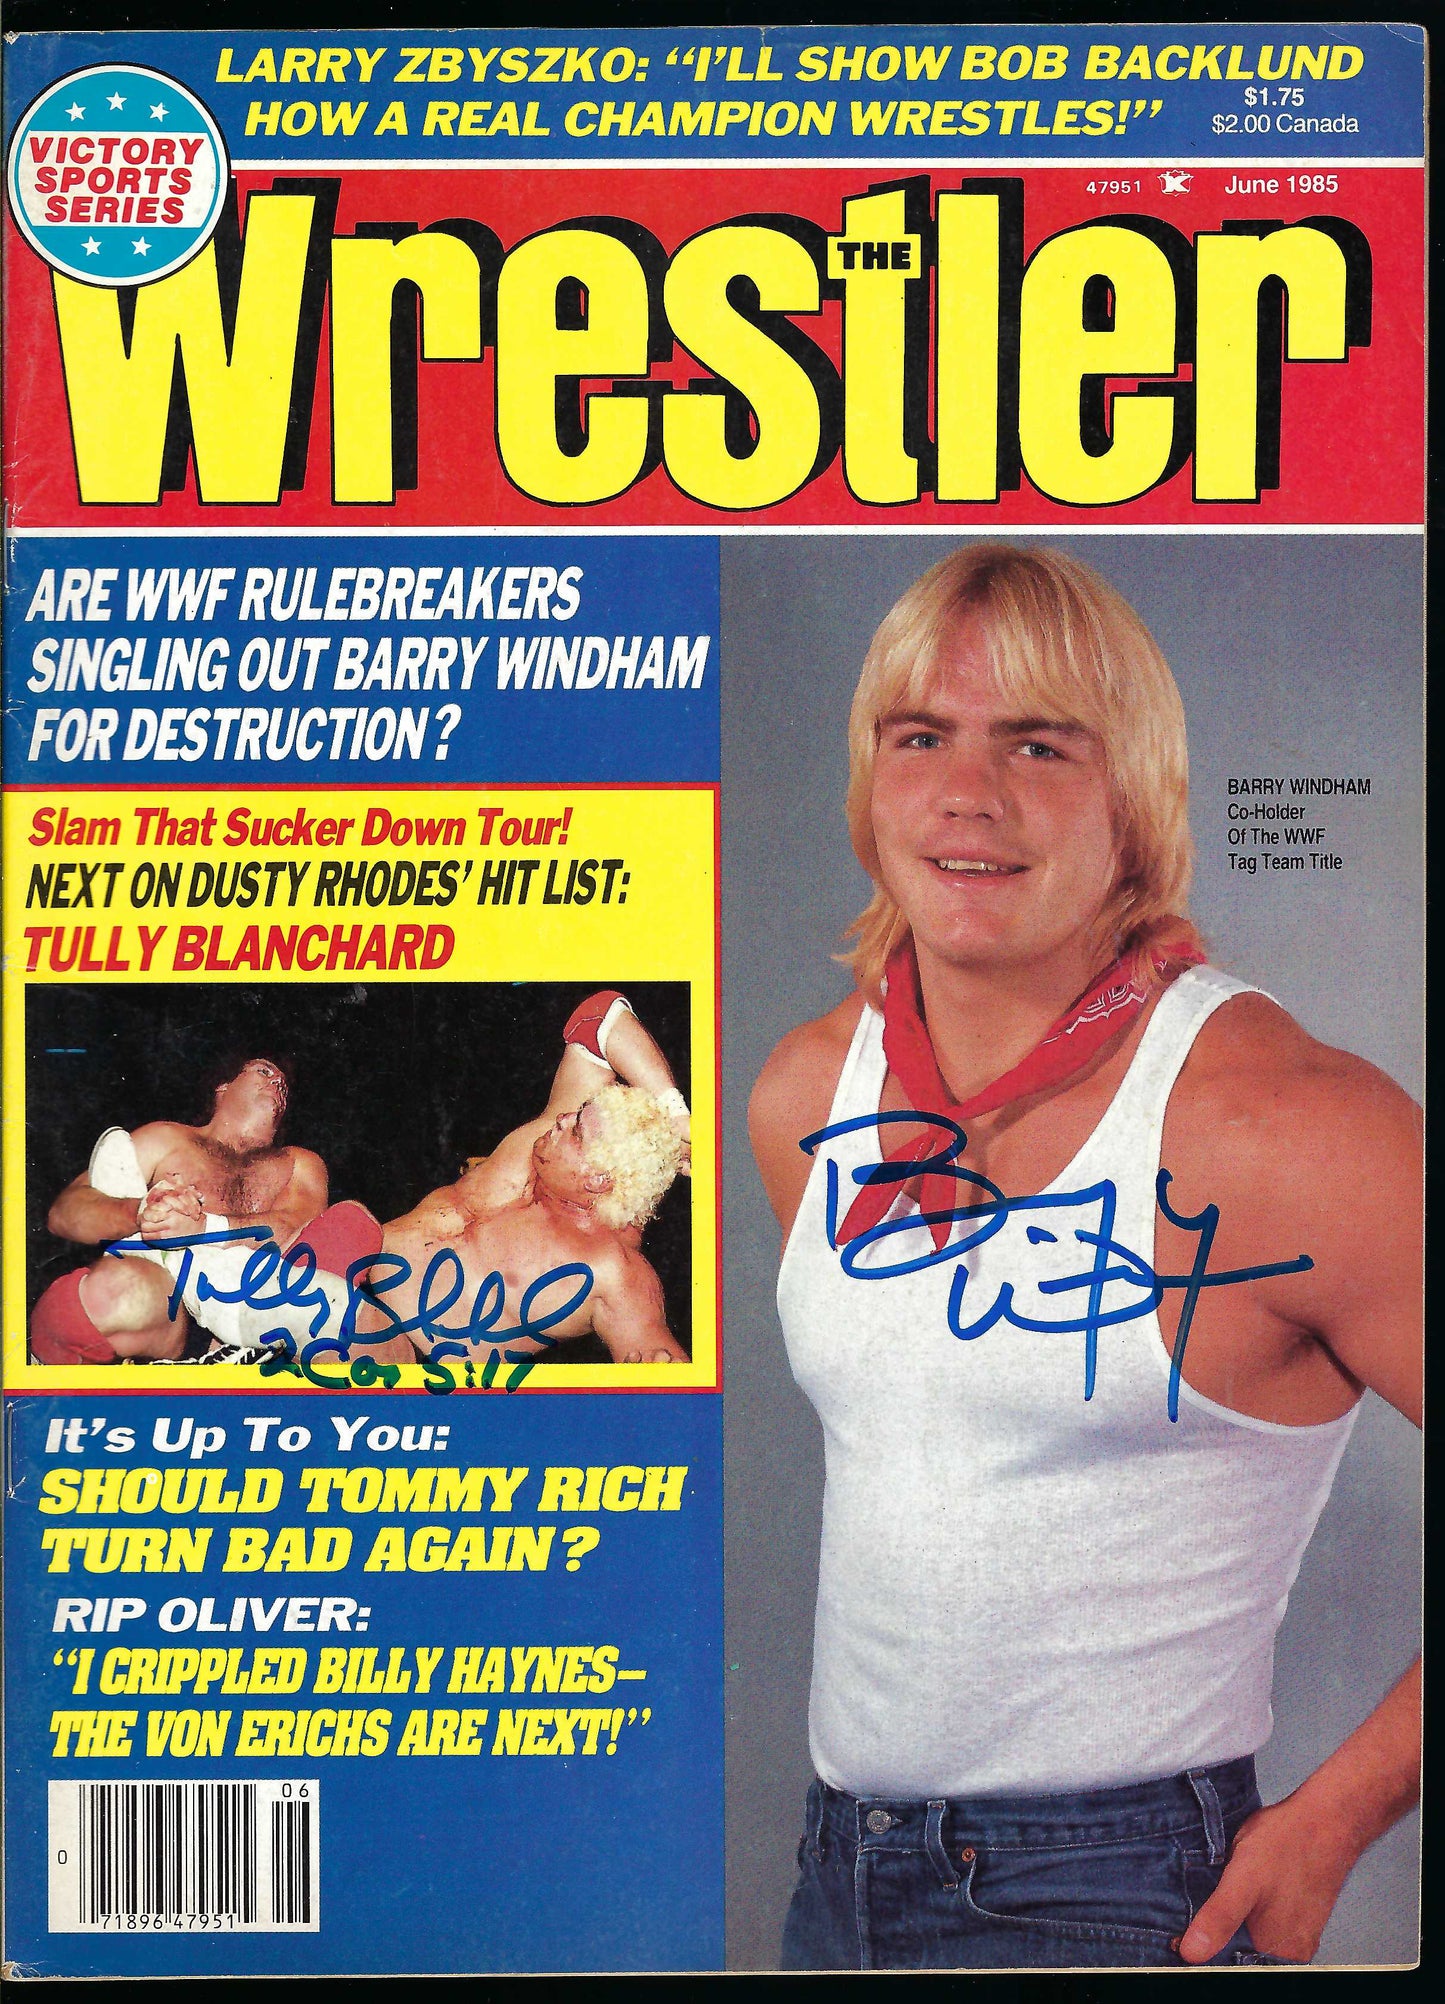 AM863  Tully Blanchard  Barry Windham VERY RARE Autographed Vintage Wrestling Magazine w/COA